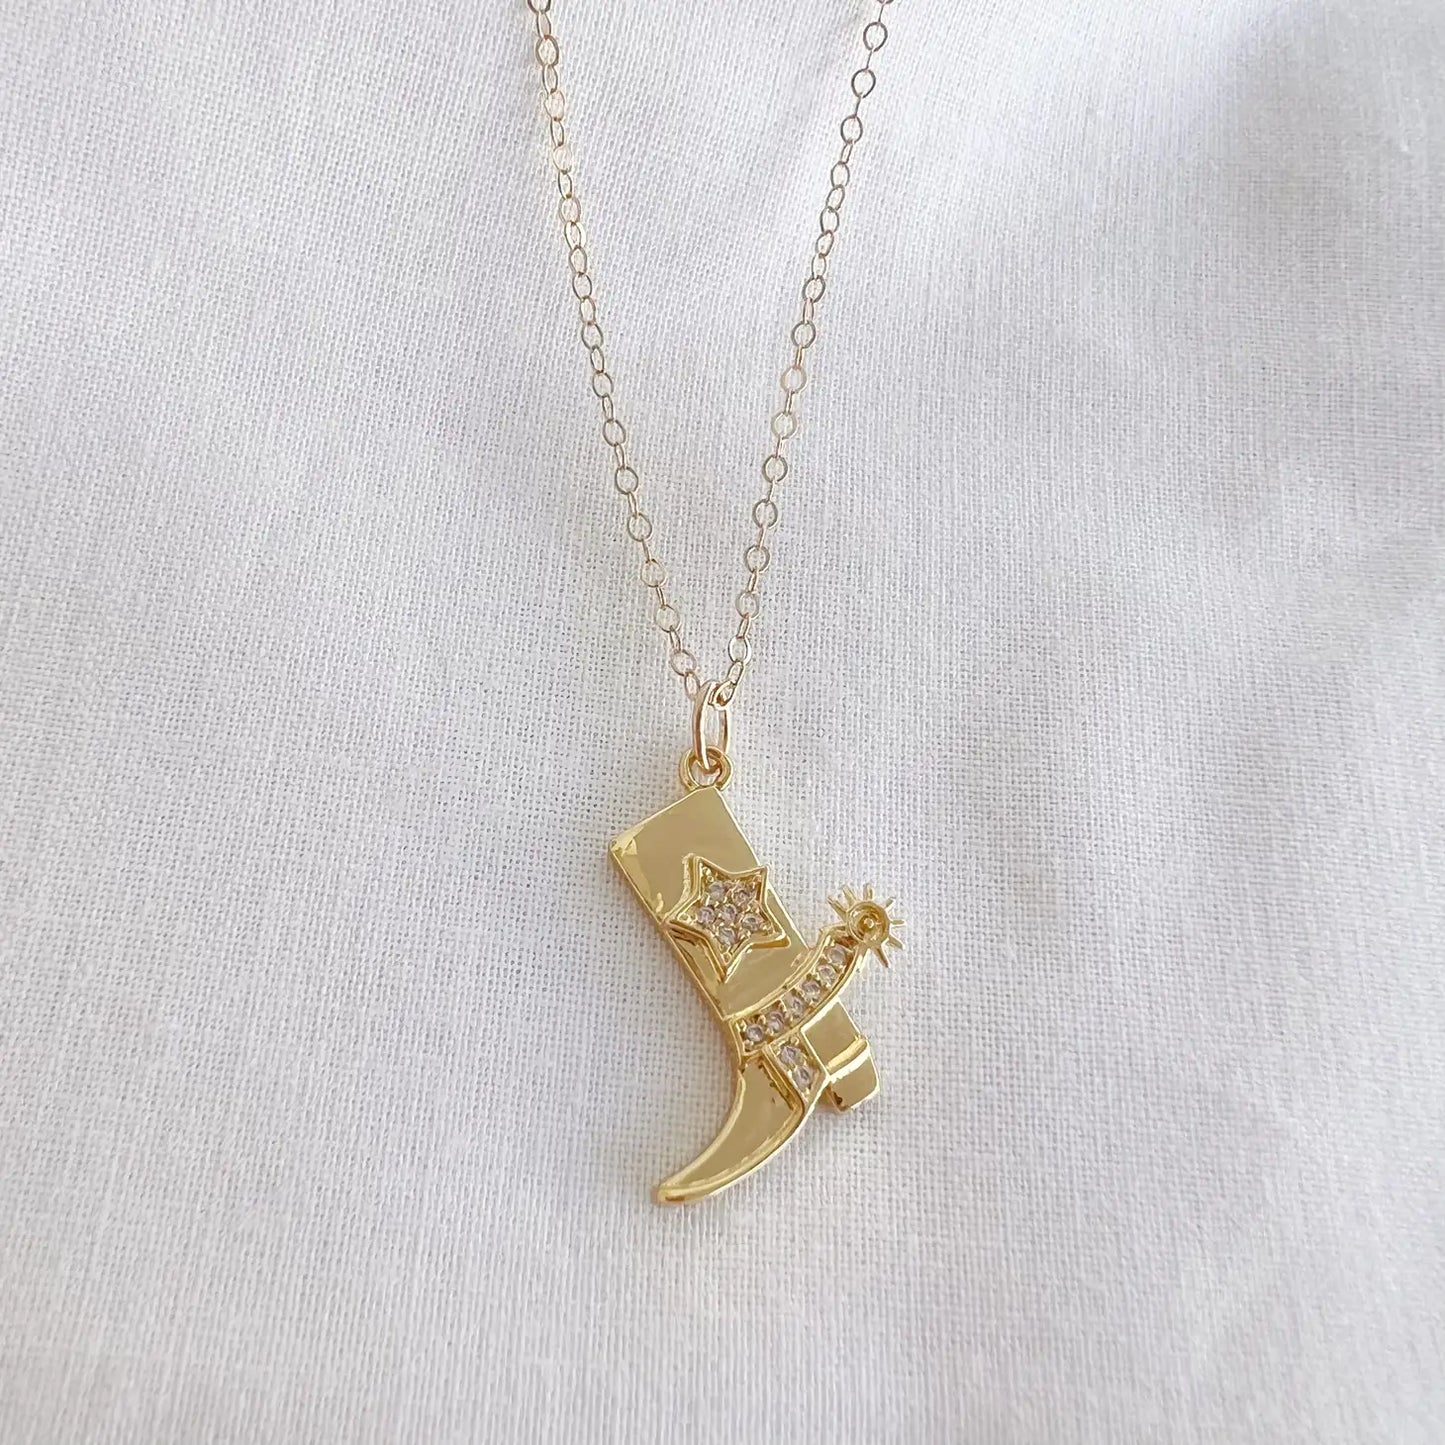 Country Girl Cowboy Boot Necklace Gold Filled